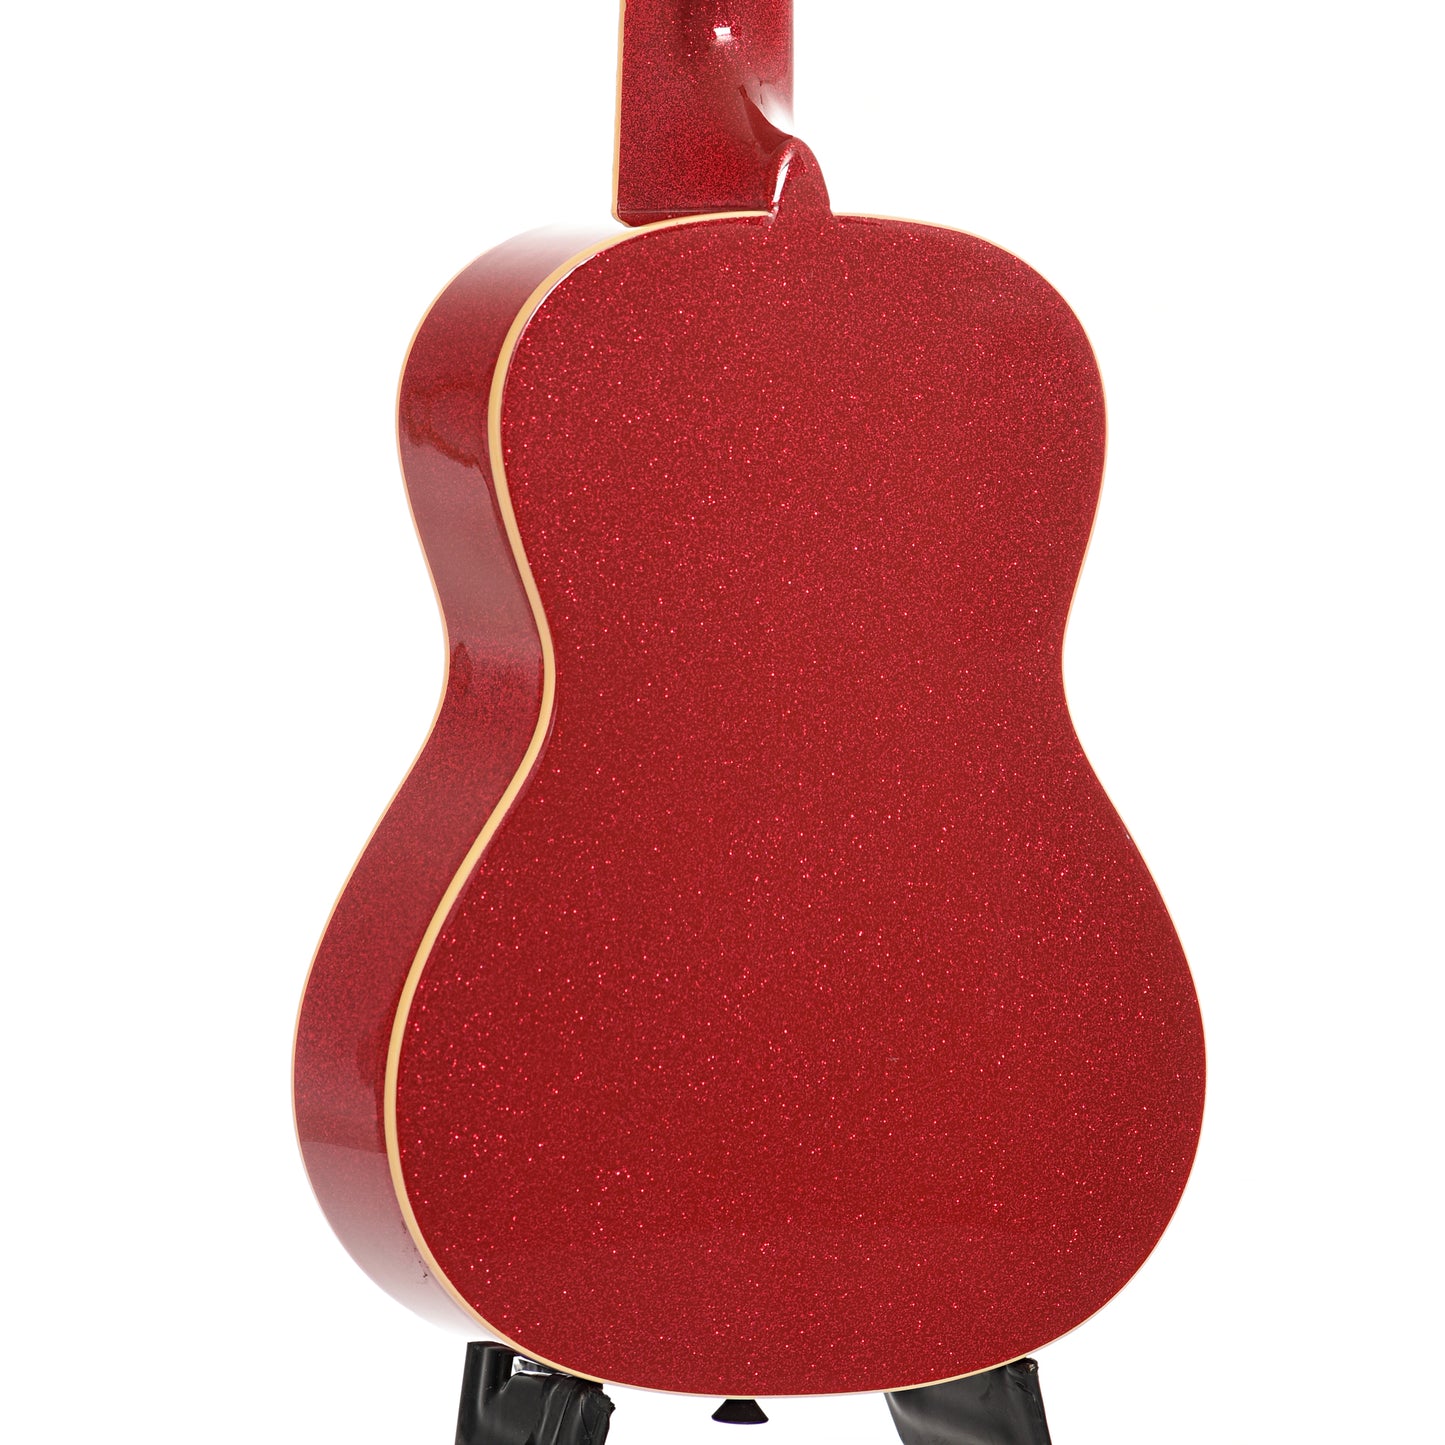 Back and side of Kala Gloss Sparkle Concert Ukulele, Ritzy Red (recent)